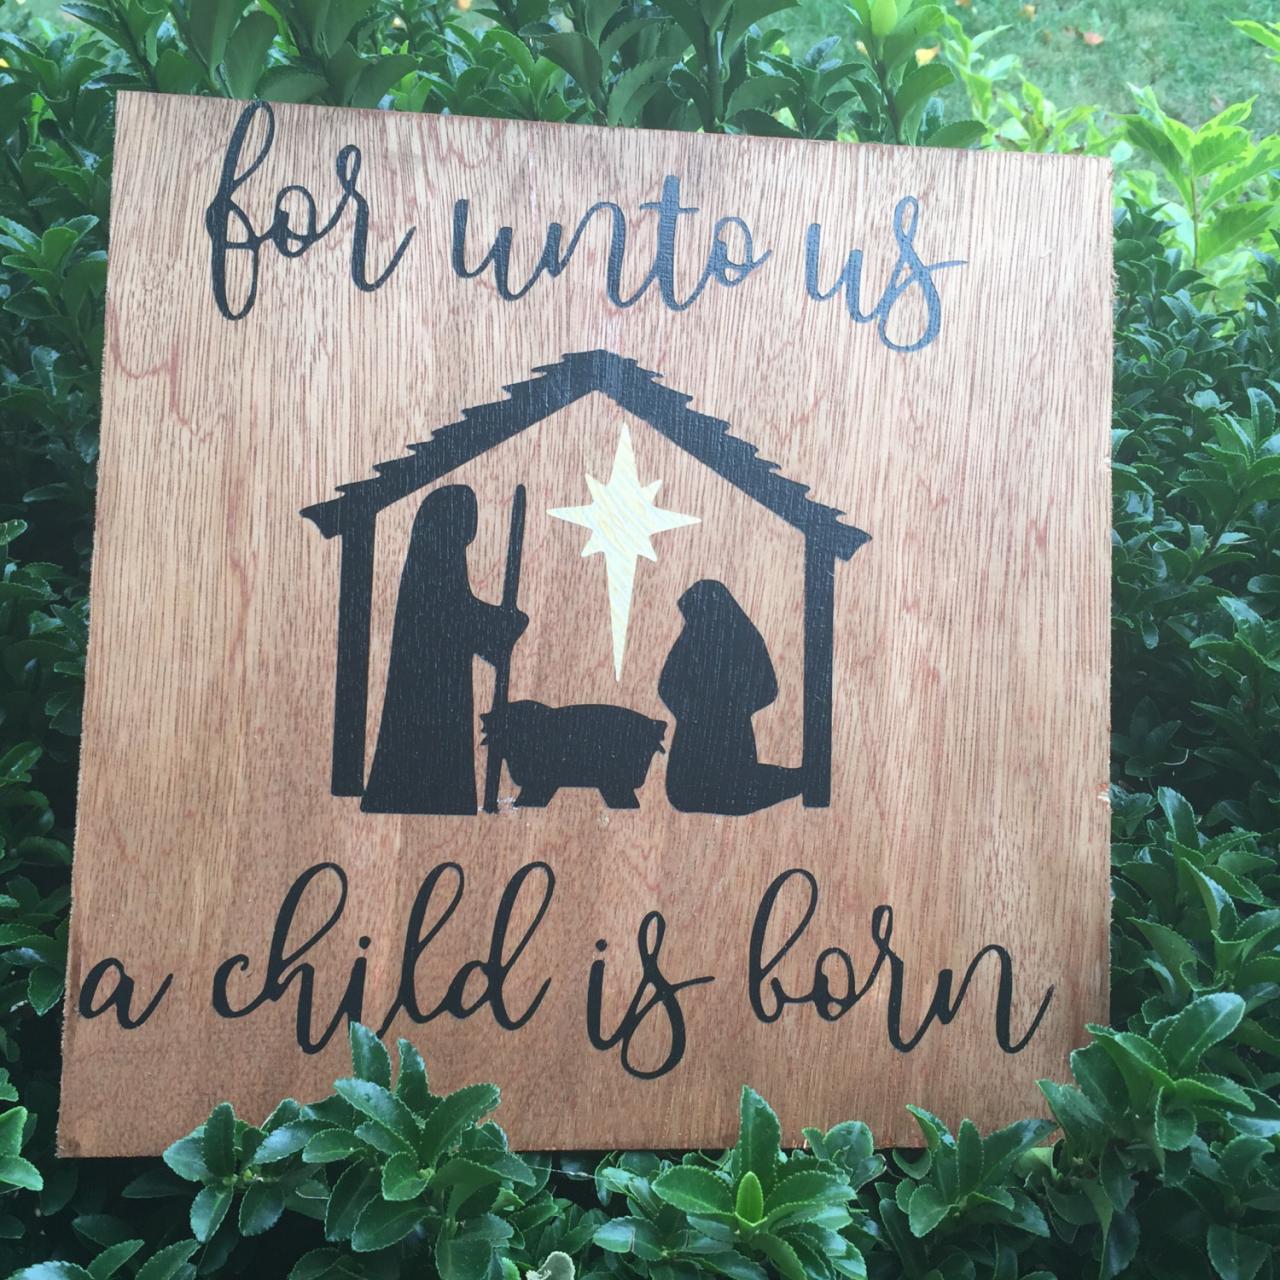 For Unto Us A Child Is Born. 12x12 Hand Painted Wood Stained Sign.